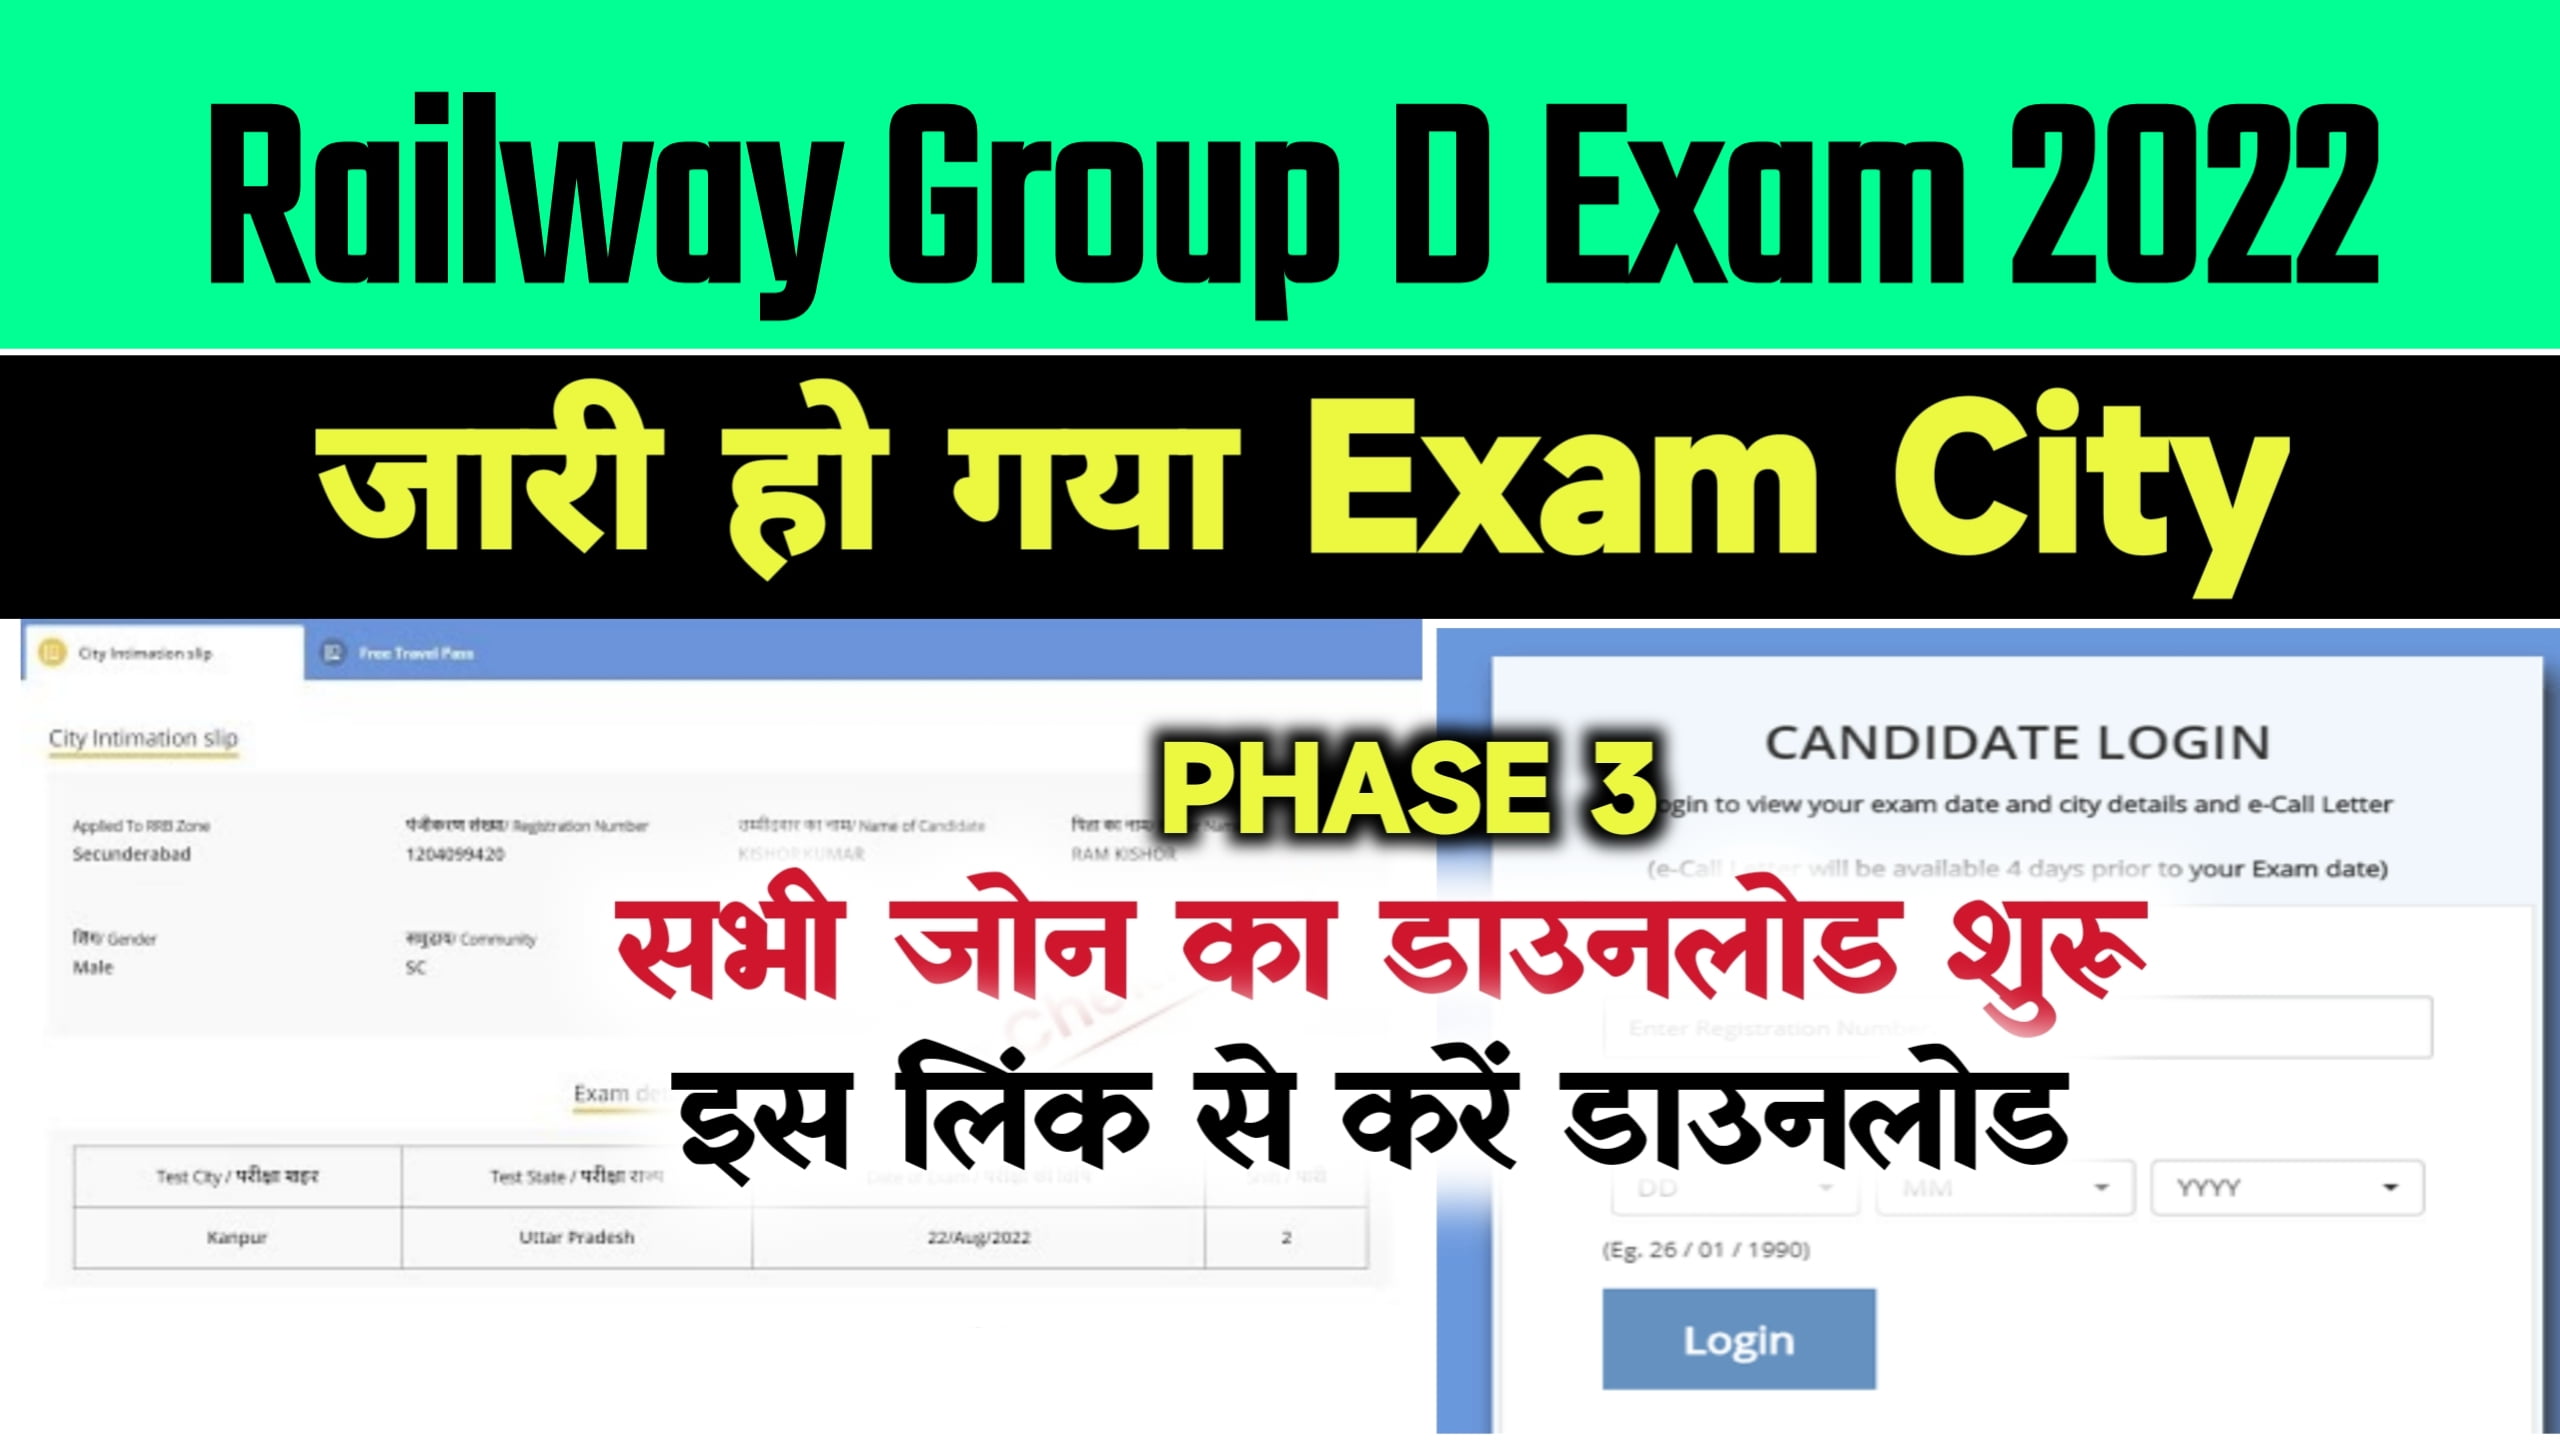 RRB Group D Phase 3 Exam City 2022 Download - rrbcdg.gov.in Exam City